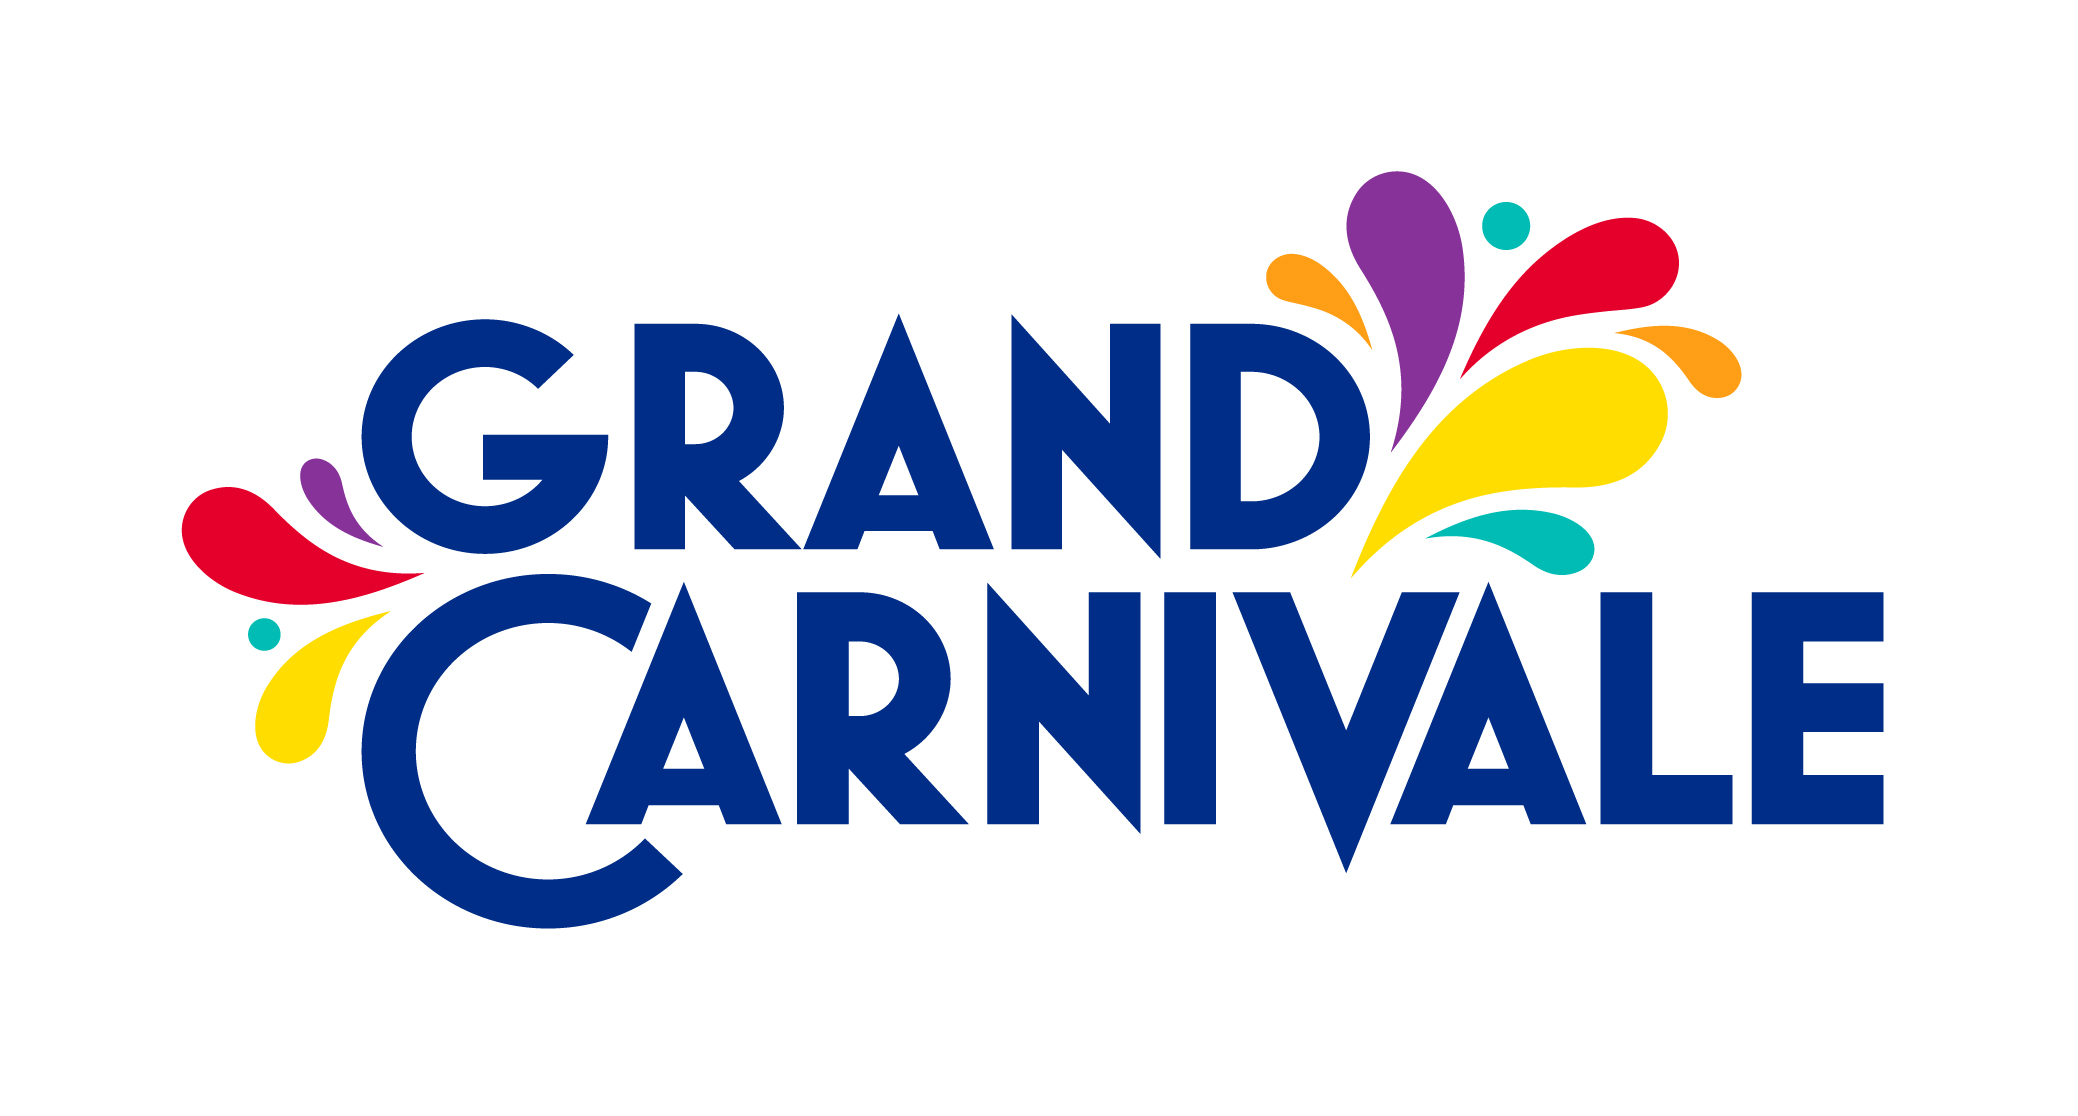 Grand Carnivale brings an all-new high spirited parade and nightly street party with live entertainment and authentic foods from around the world -  coming to select Cedar Fair parks for limited times this summer.